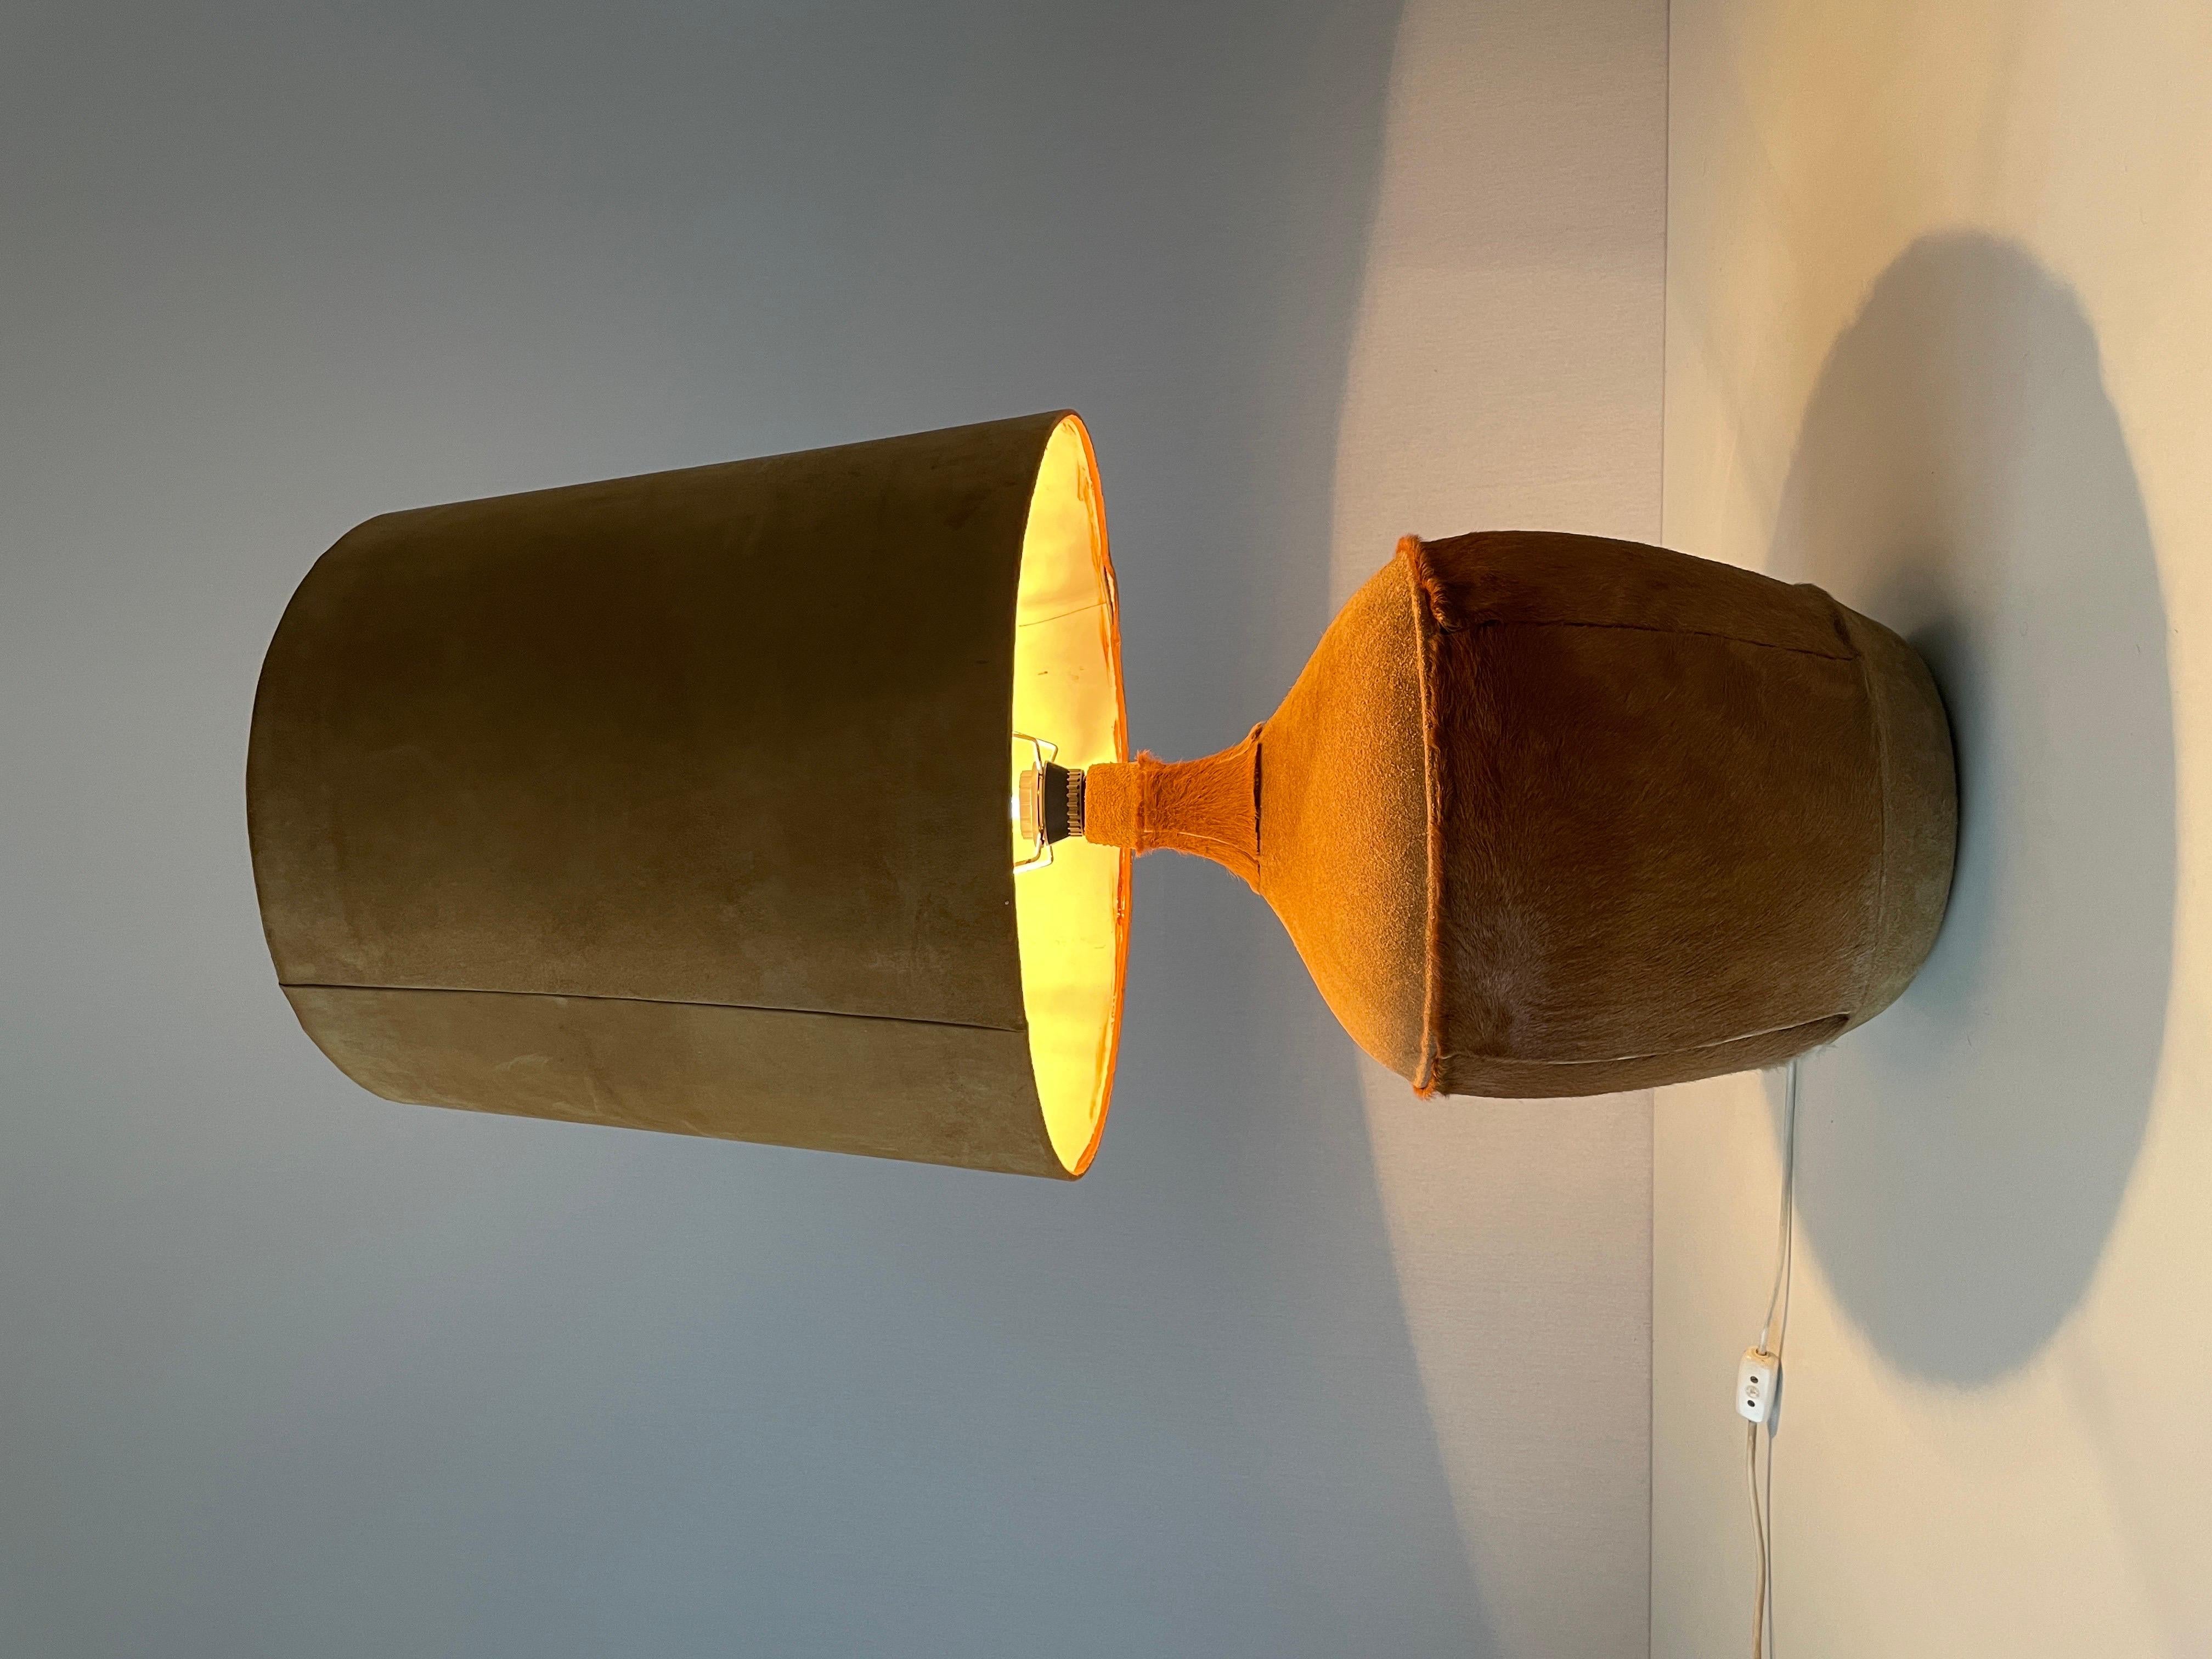 Tan Suede Leather and Glass Shade Floor or Table Lamp, 1960s, Denmark For Sale 5